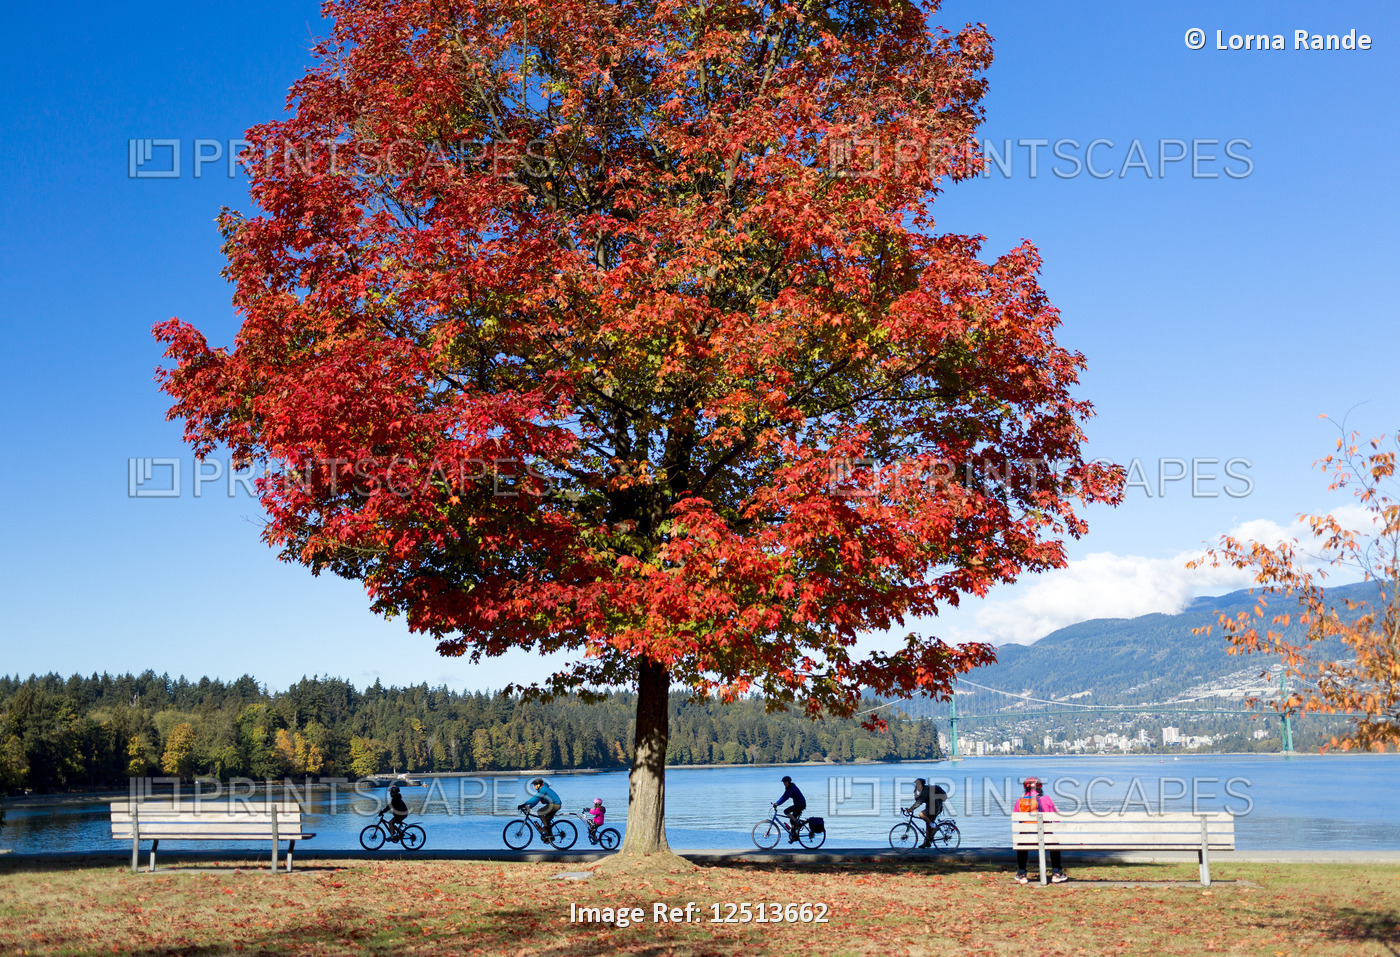 A tree with bright red foliage in Stanley park with cyclists passing on a trail ...